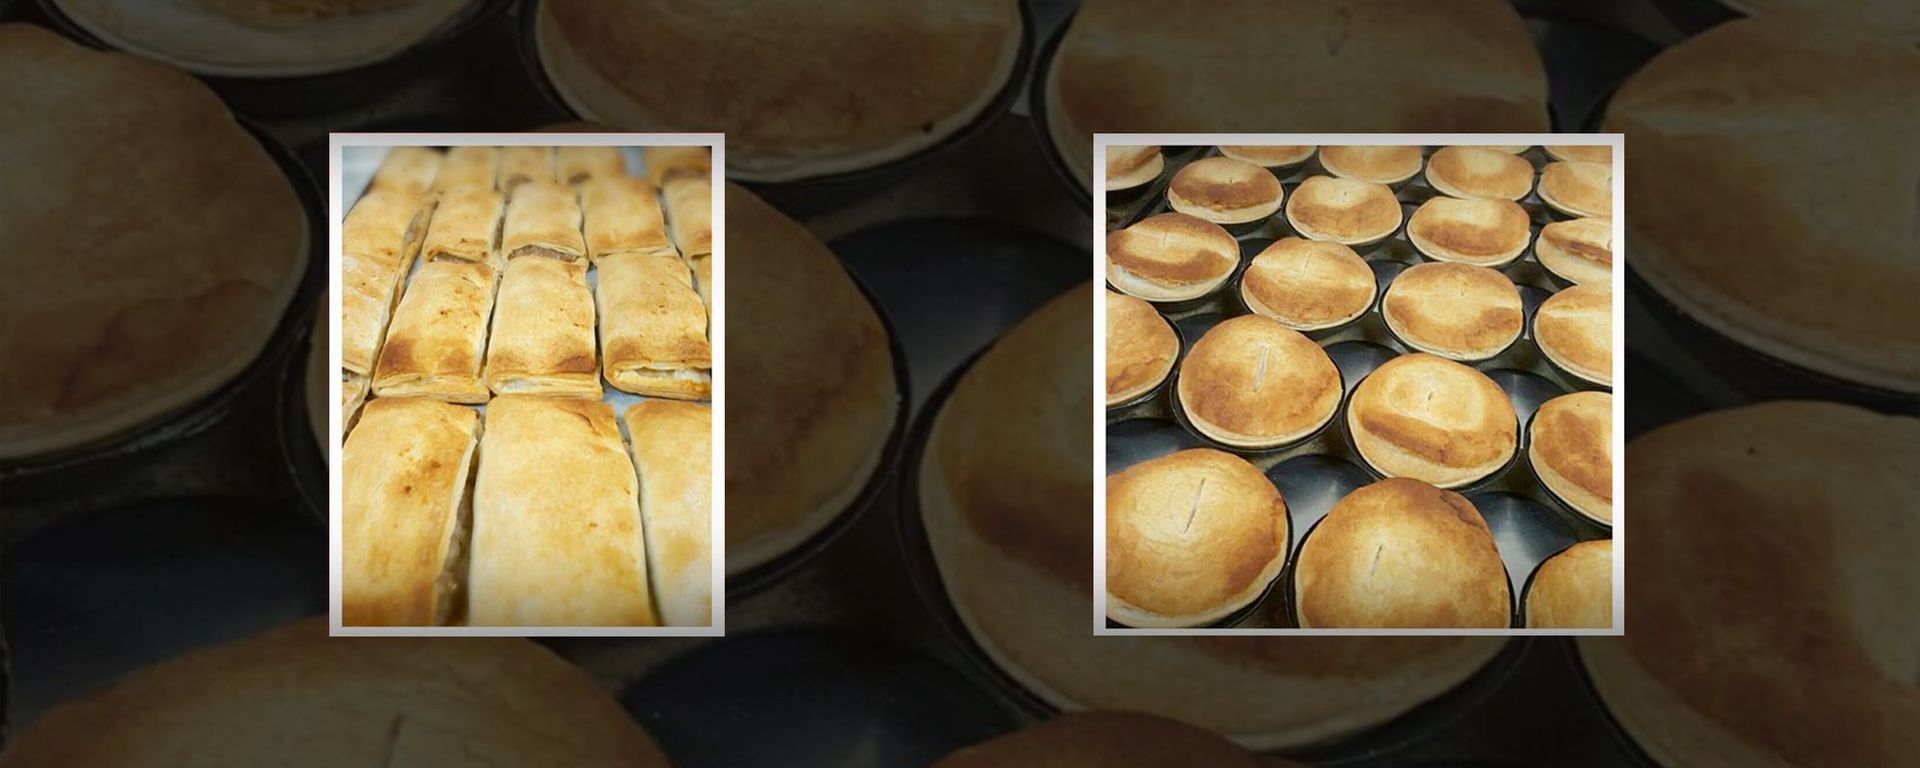 Quality baked goods served at Pies Townsville